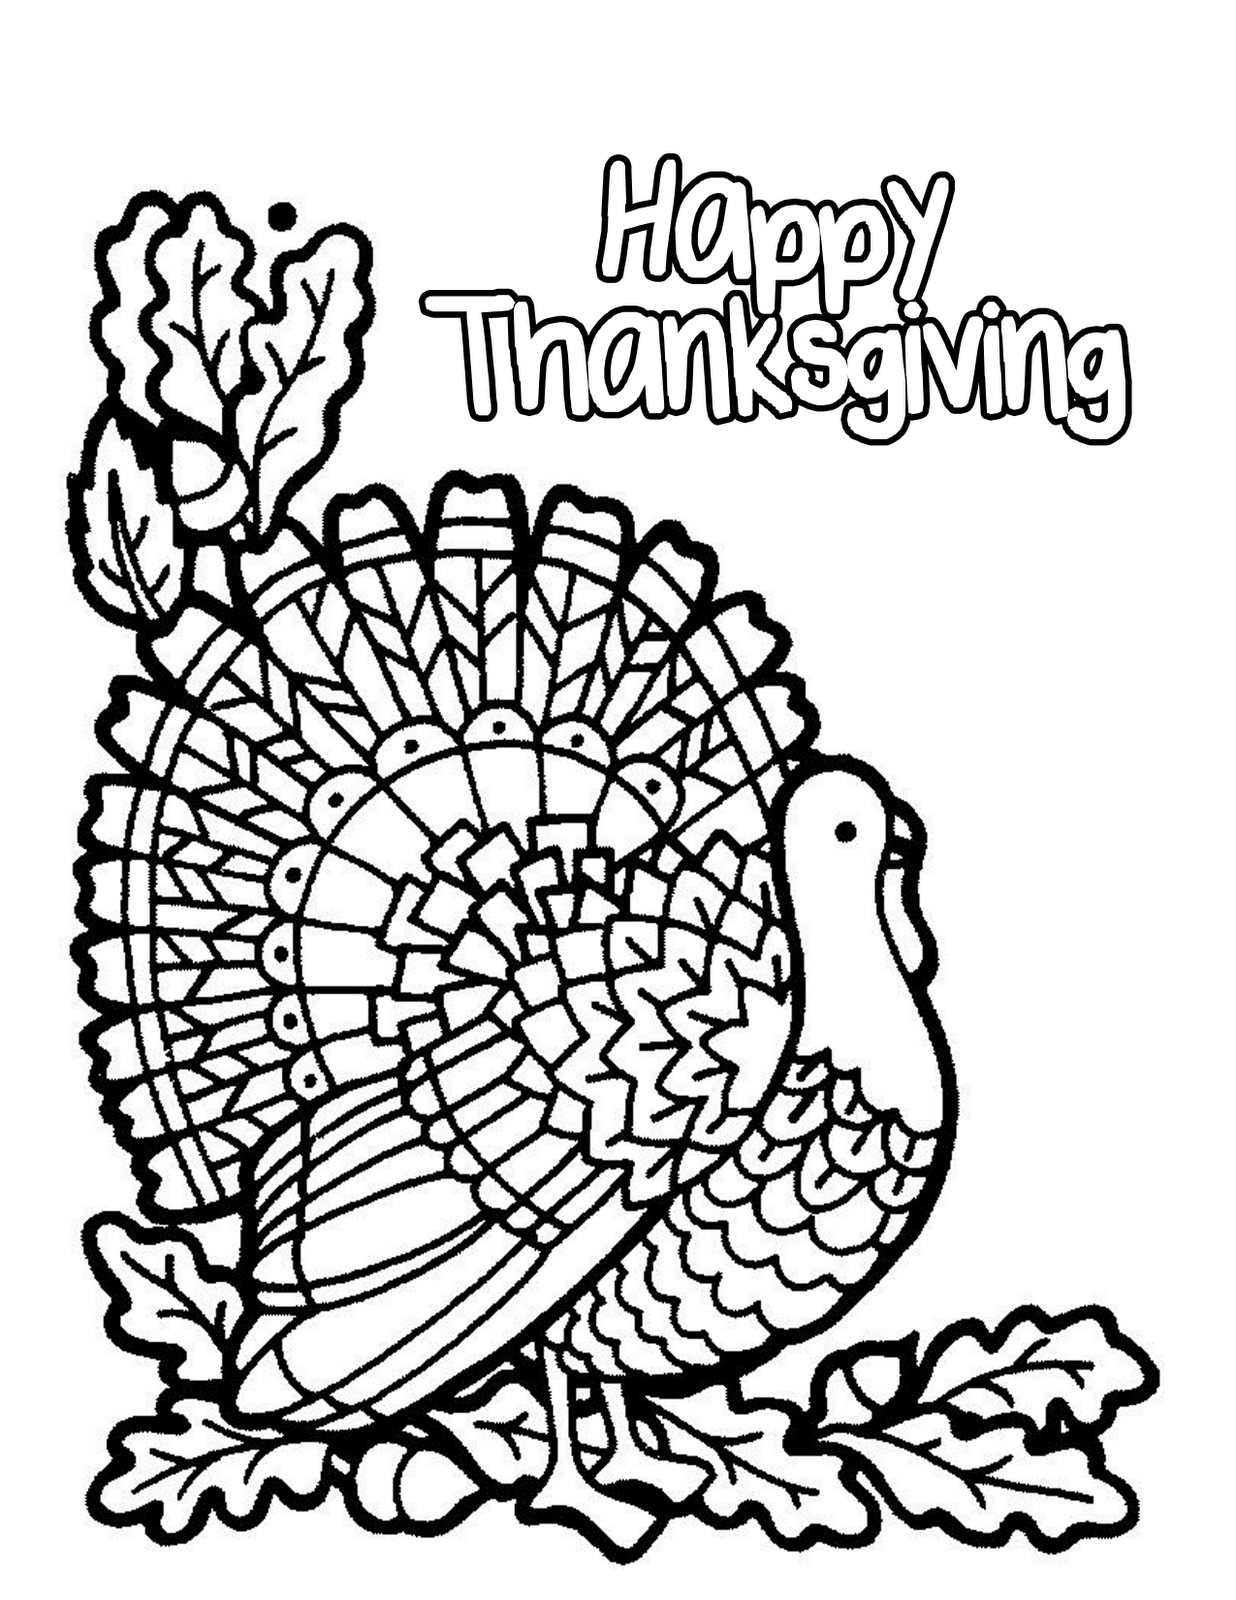 Happy thanksgiving coloring pages to download and print